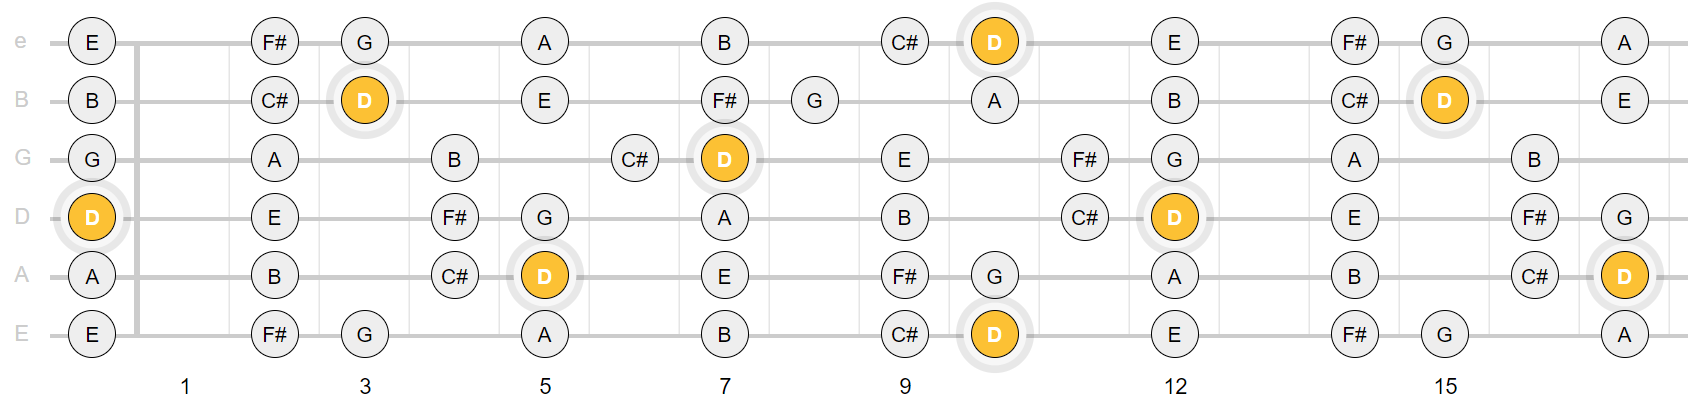 D major scale notes across the fretboard